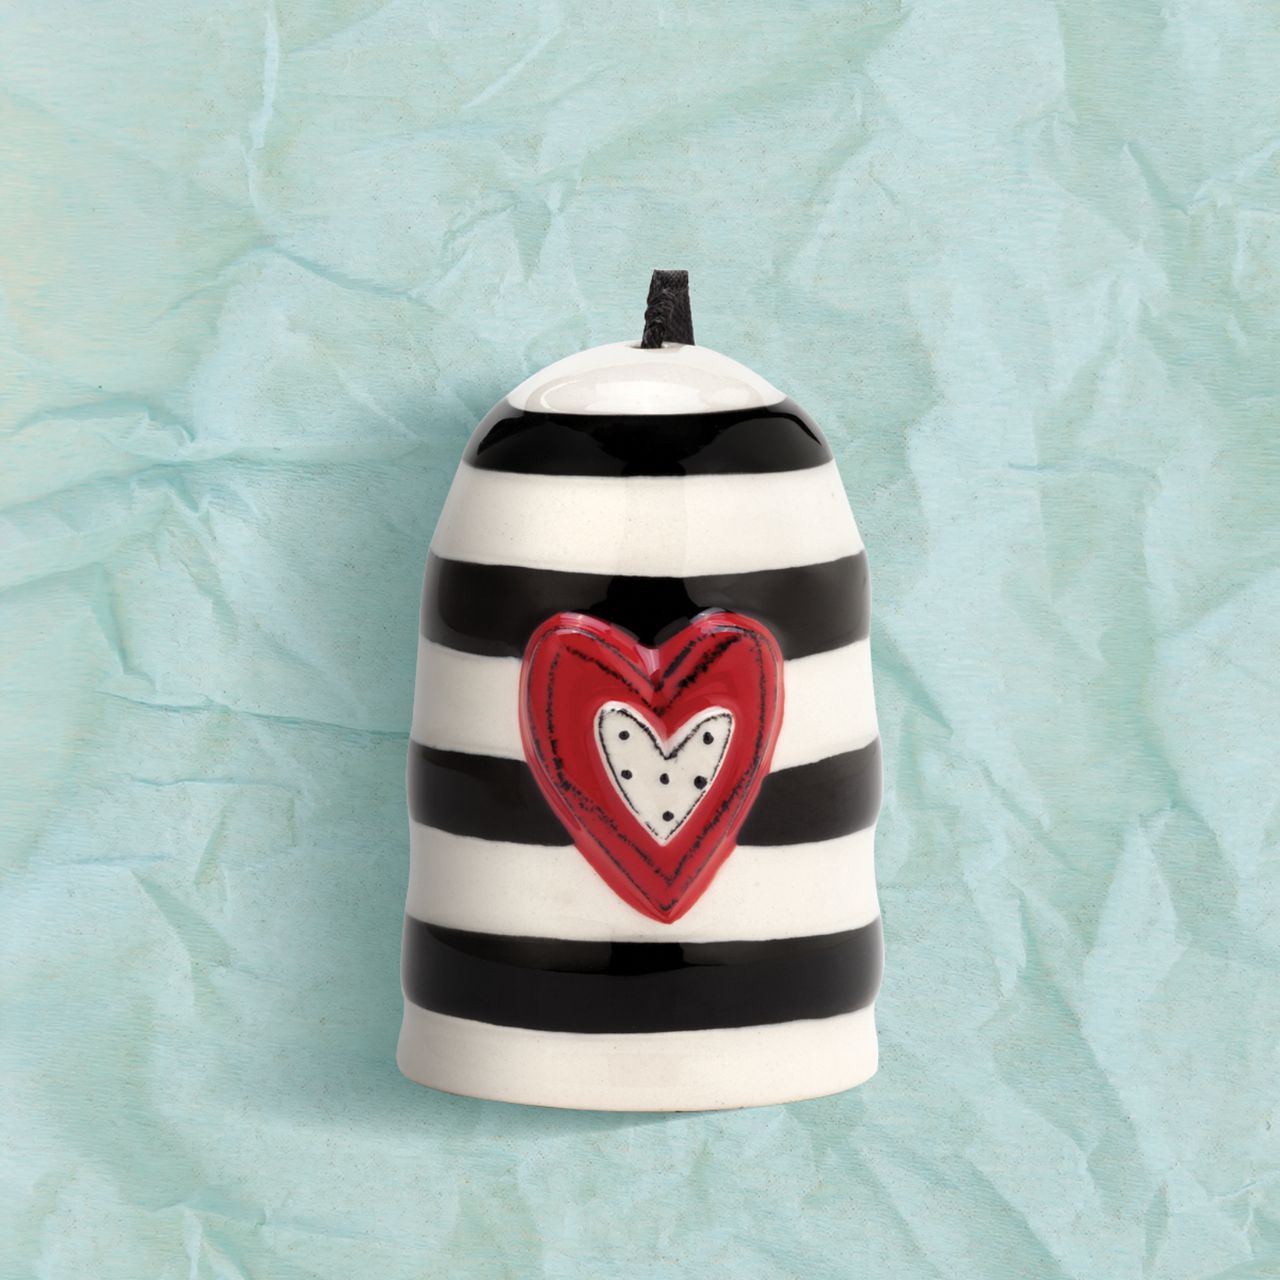 Heartful Home Bell - Love by Demdaco  Add a whimsical, happy touch to your home with Tracy Pesche's uplifting ceramic art. Her hand-painted Heartful Home Bell - Love is a bright token of love that makes a pleasing, sing-song jingle whenever you desire. It is white with an array of beautiful black stripes and a bold red heart with a polka dot centre. It bears the simple word, "Love."